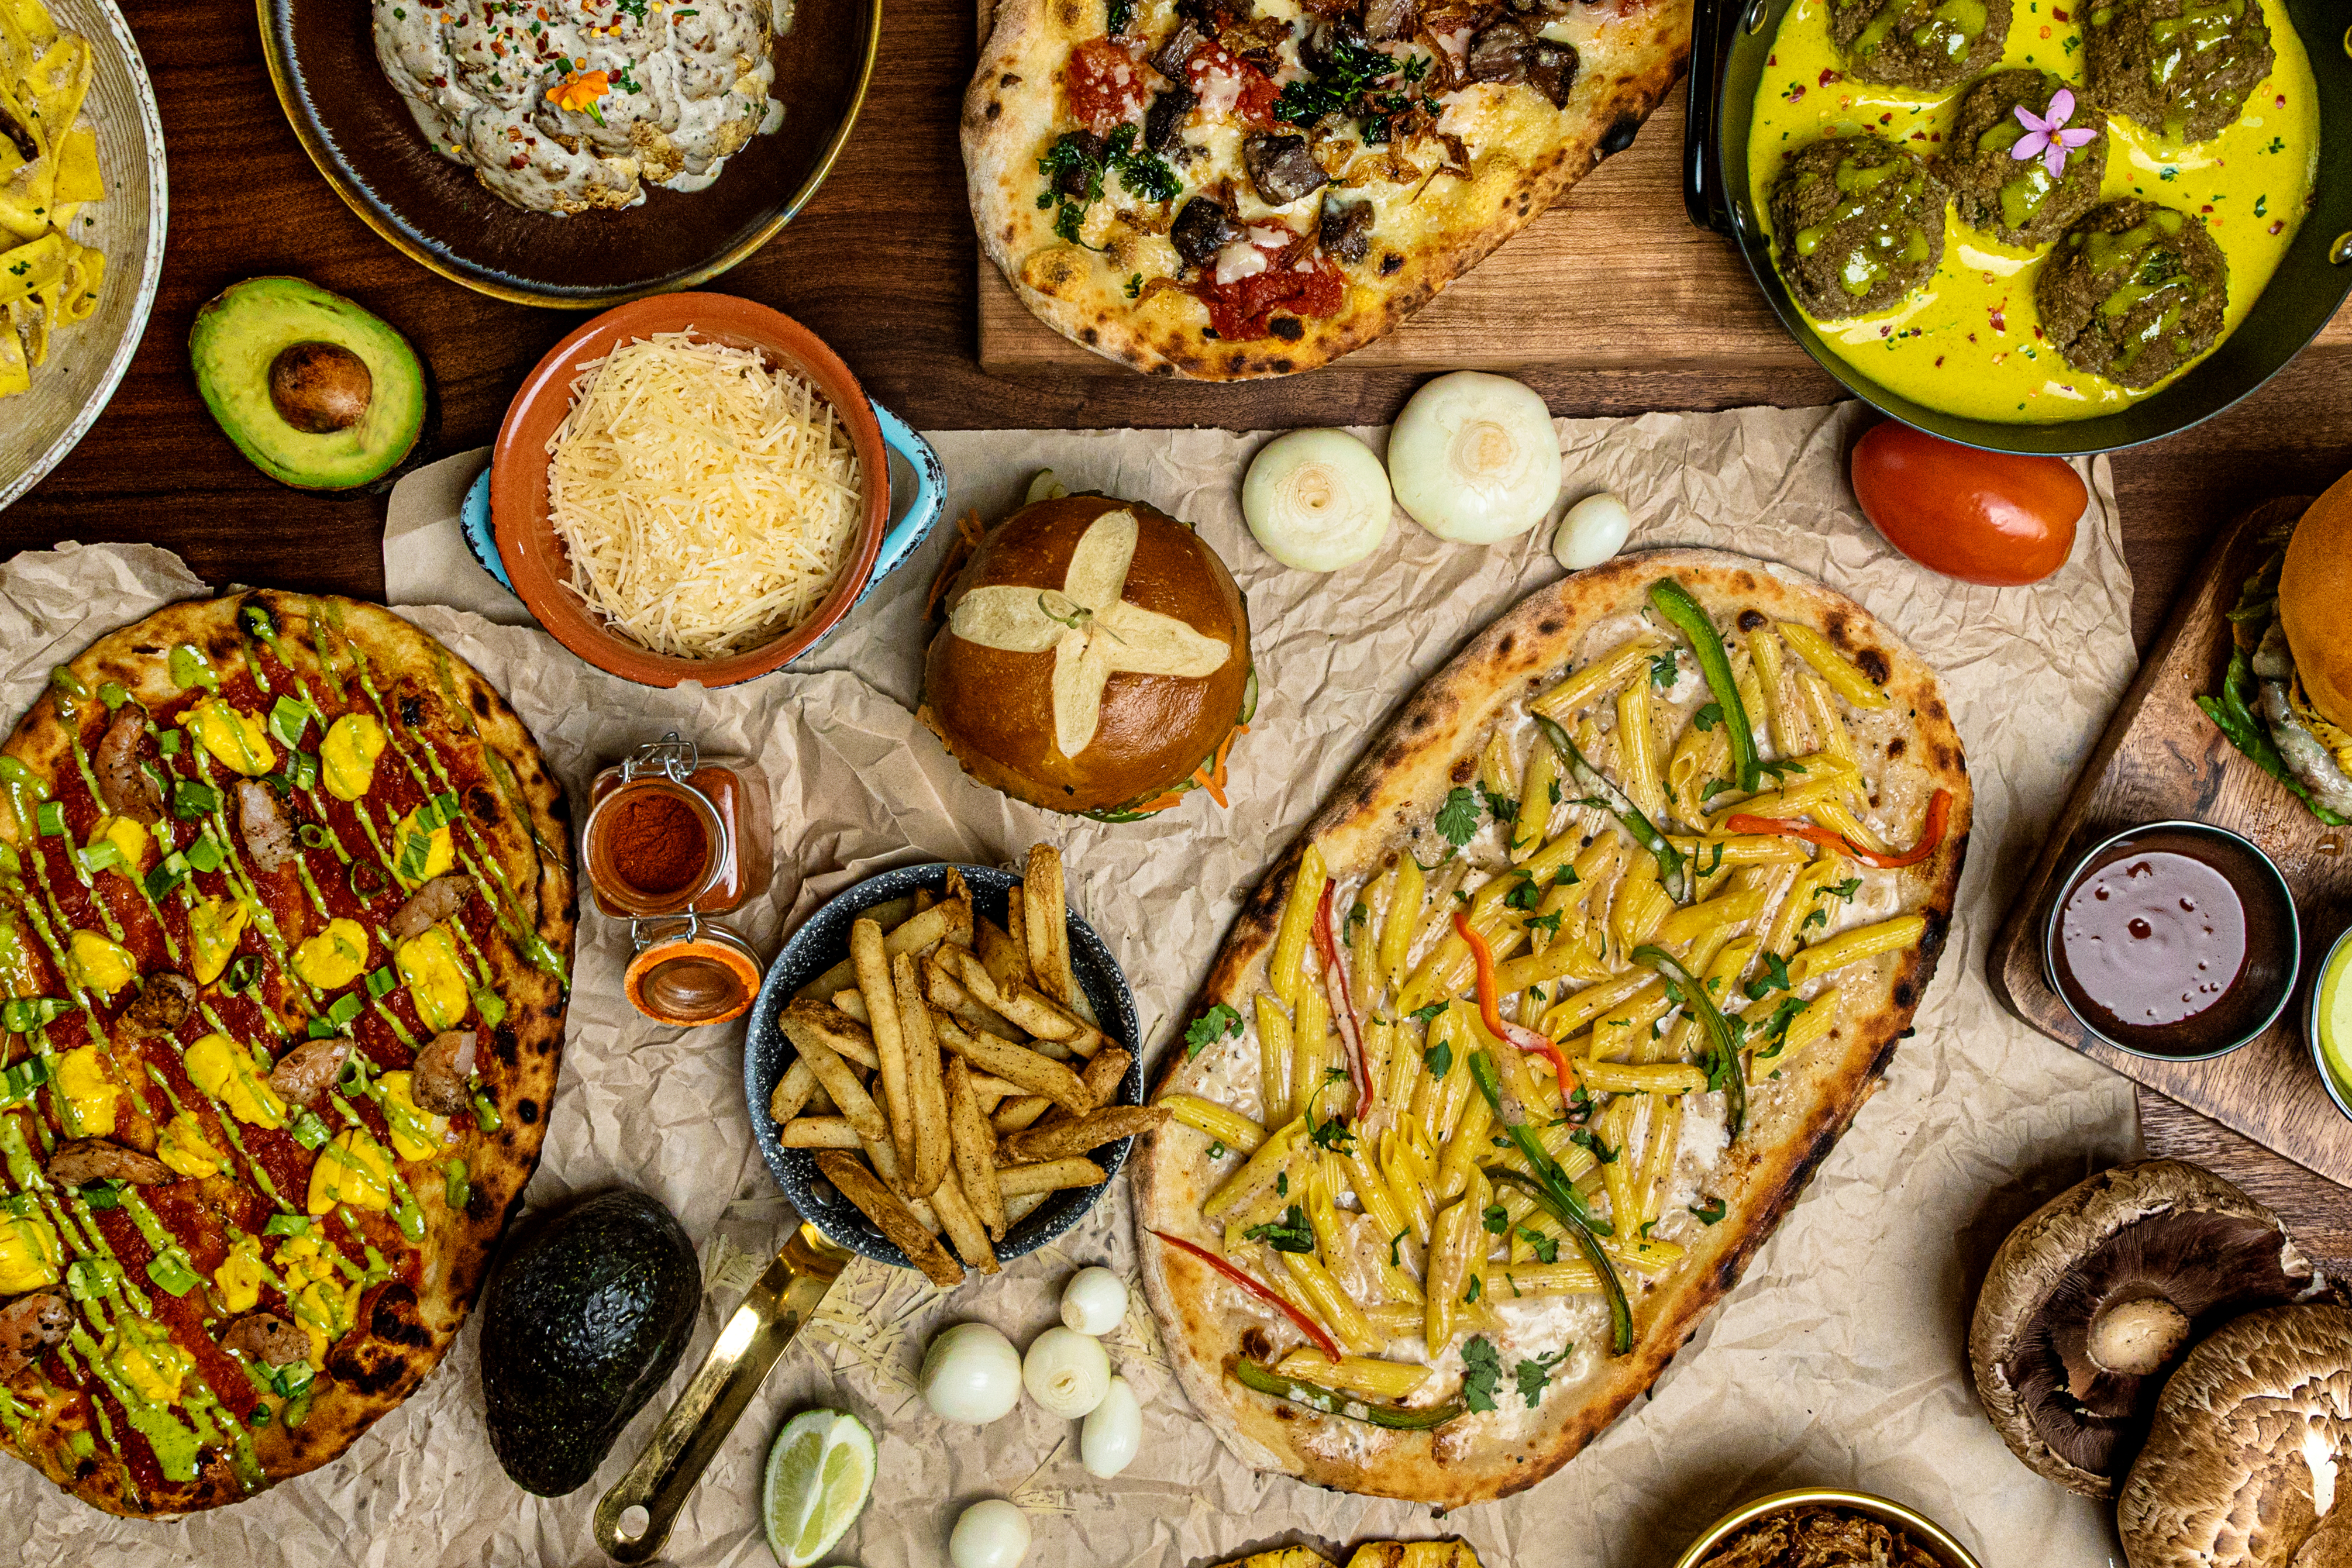 Flatbread pizzas, pretzel buns, mushrooms, and more menu items spread out on a table